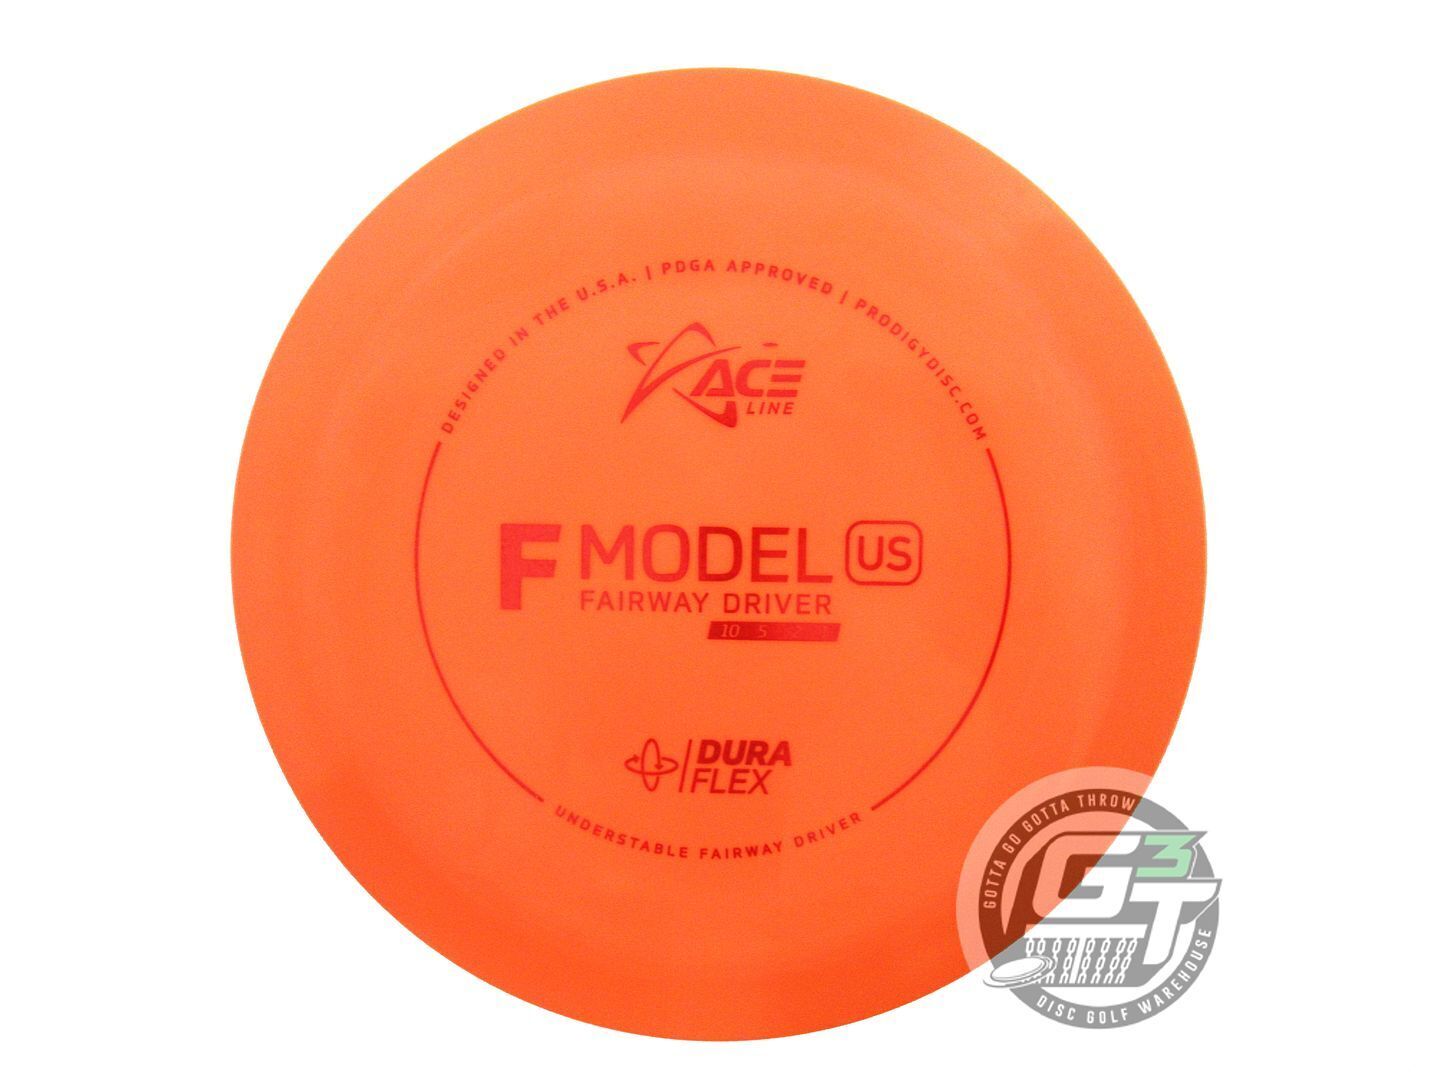 Prodigy Ace Line DuraFlex F Model US Fairway Driver Golf Disc (Individually Listed)